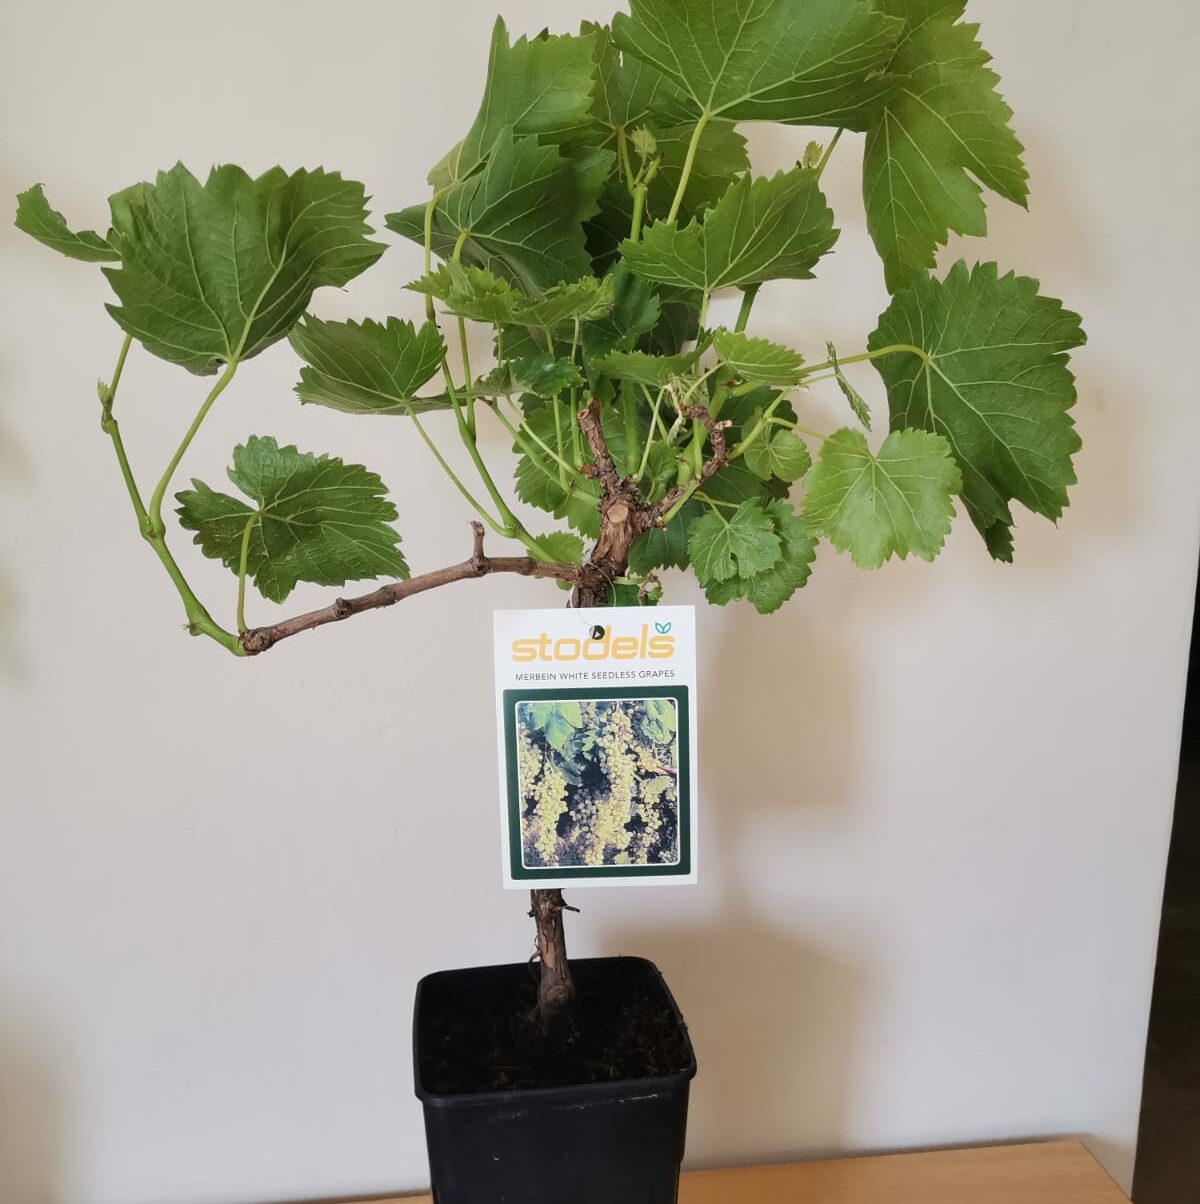 Merbein white seedless grape plant with large green leaves in a black pot.